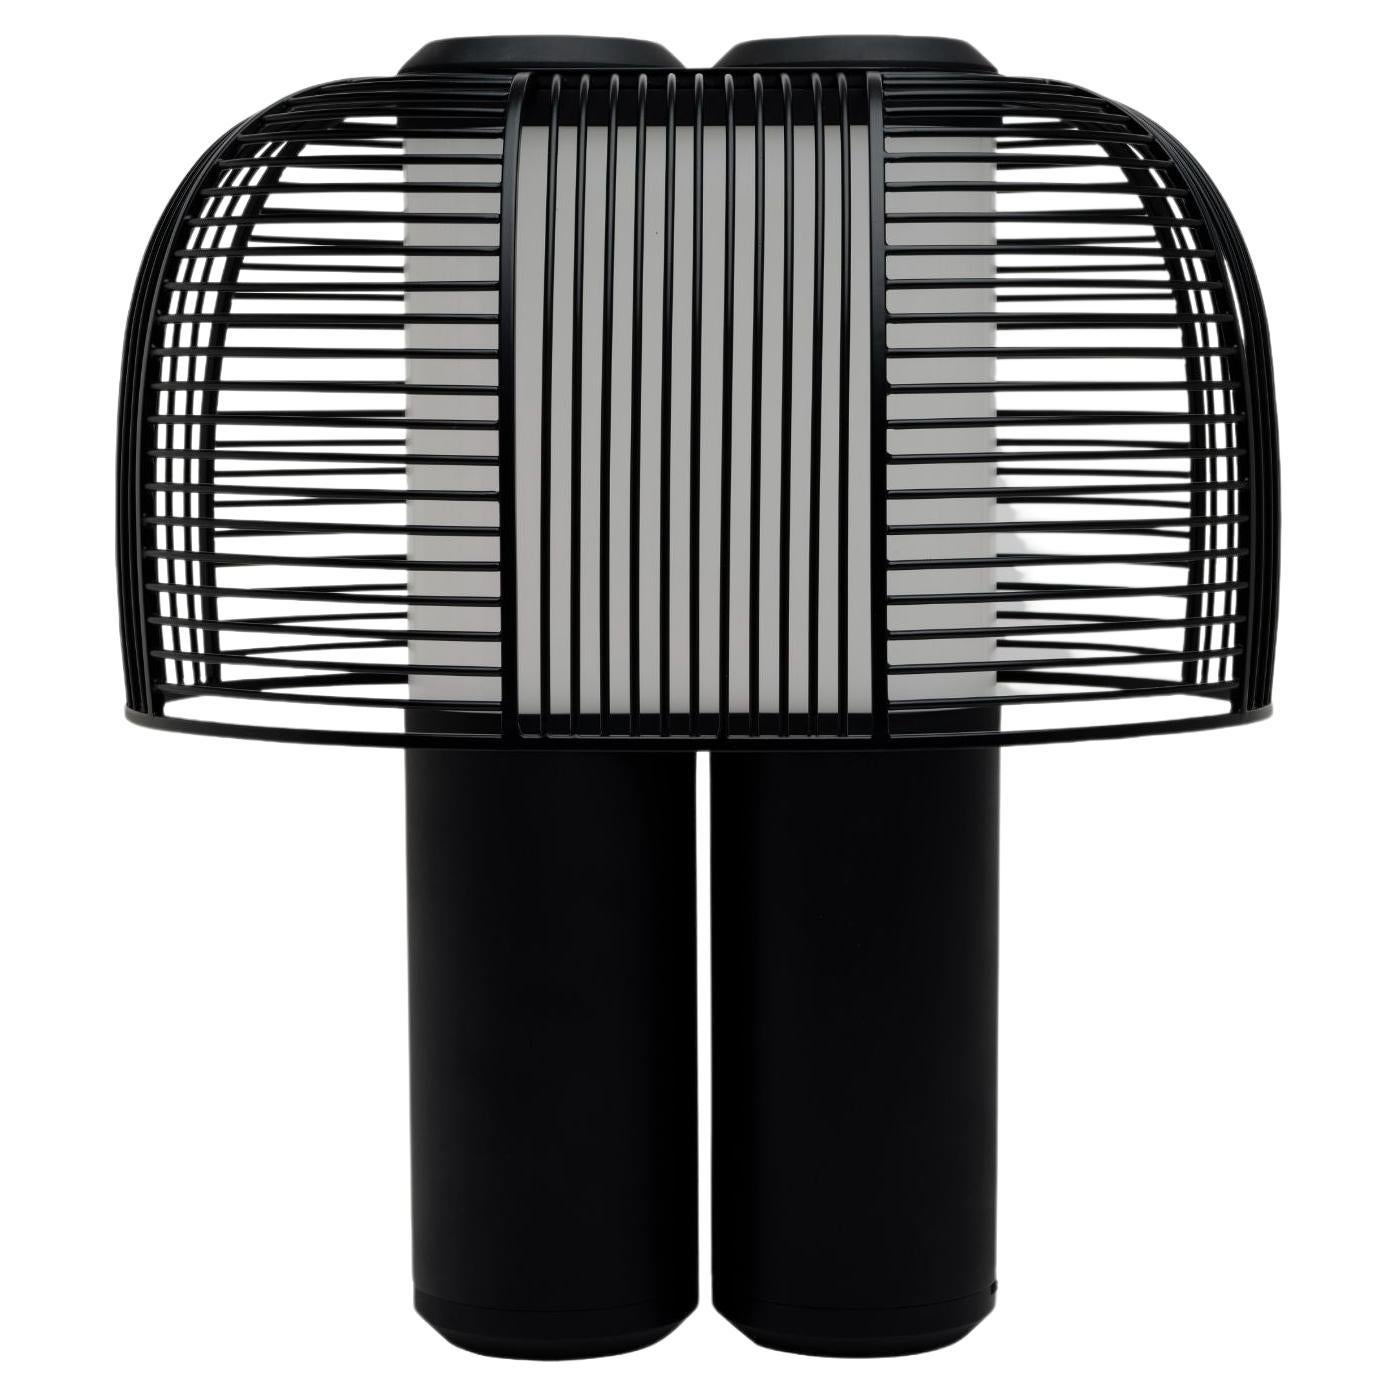 DCW Editions Yasuke Table Lamp in Black Steel and Aluminum For Sale